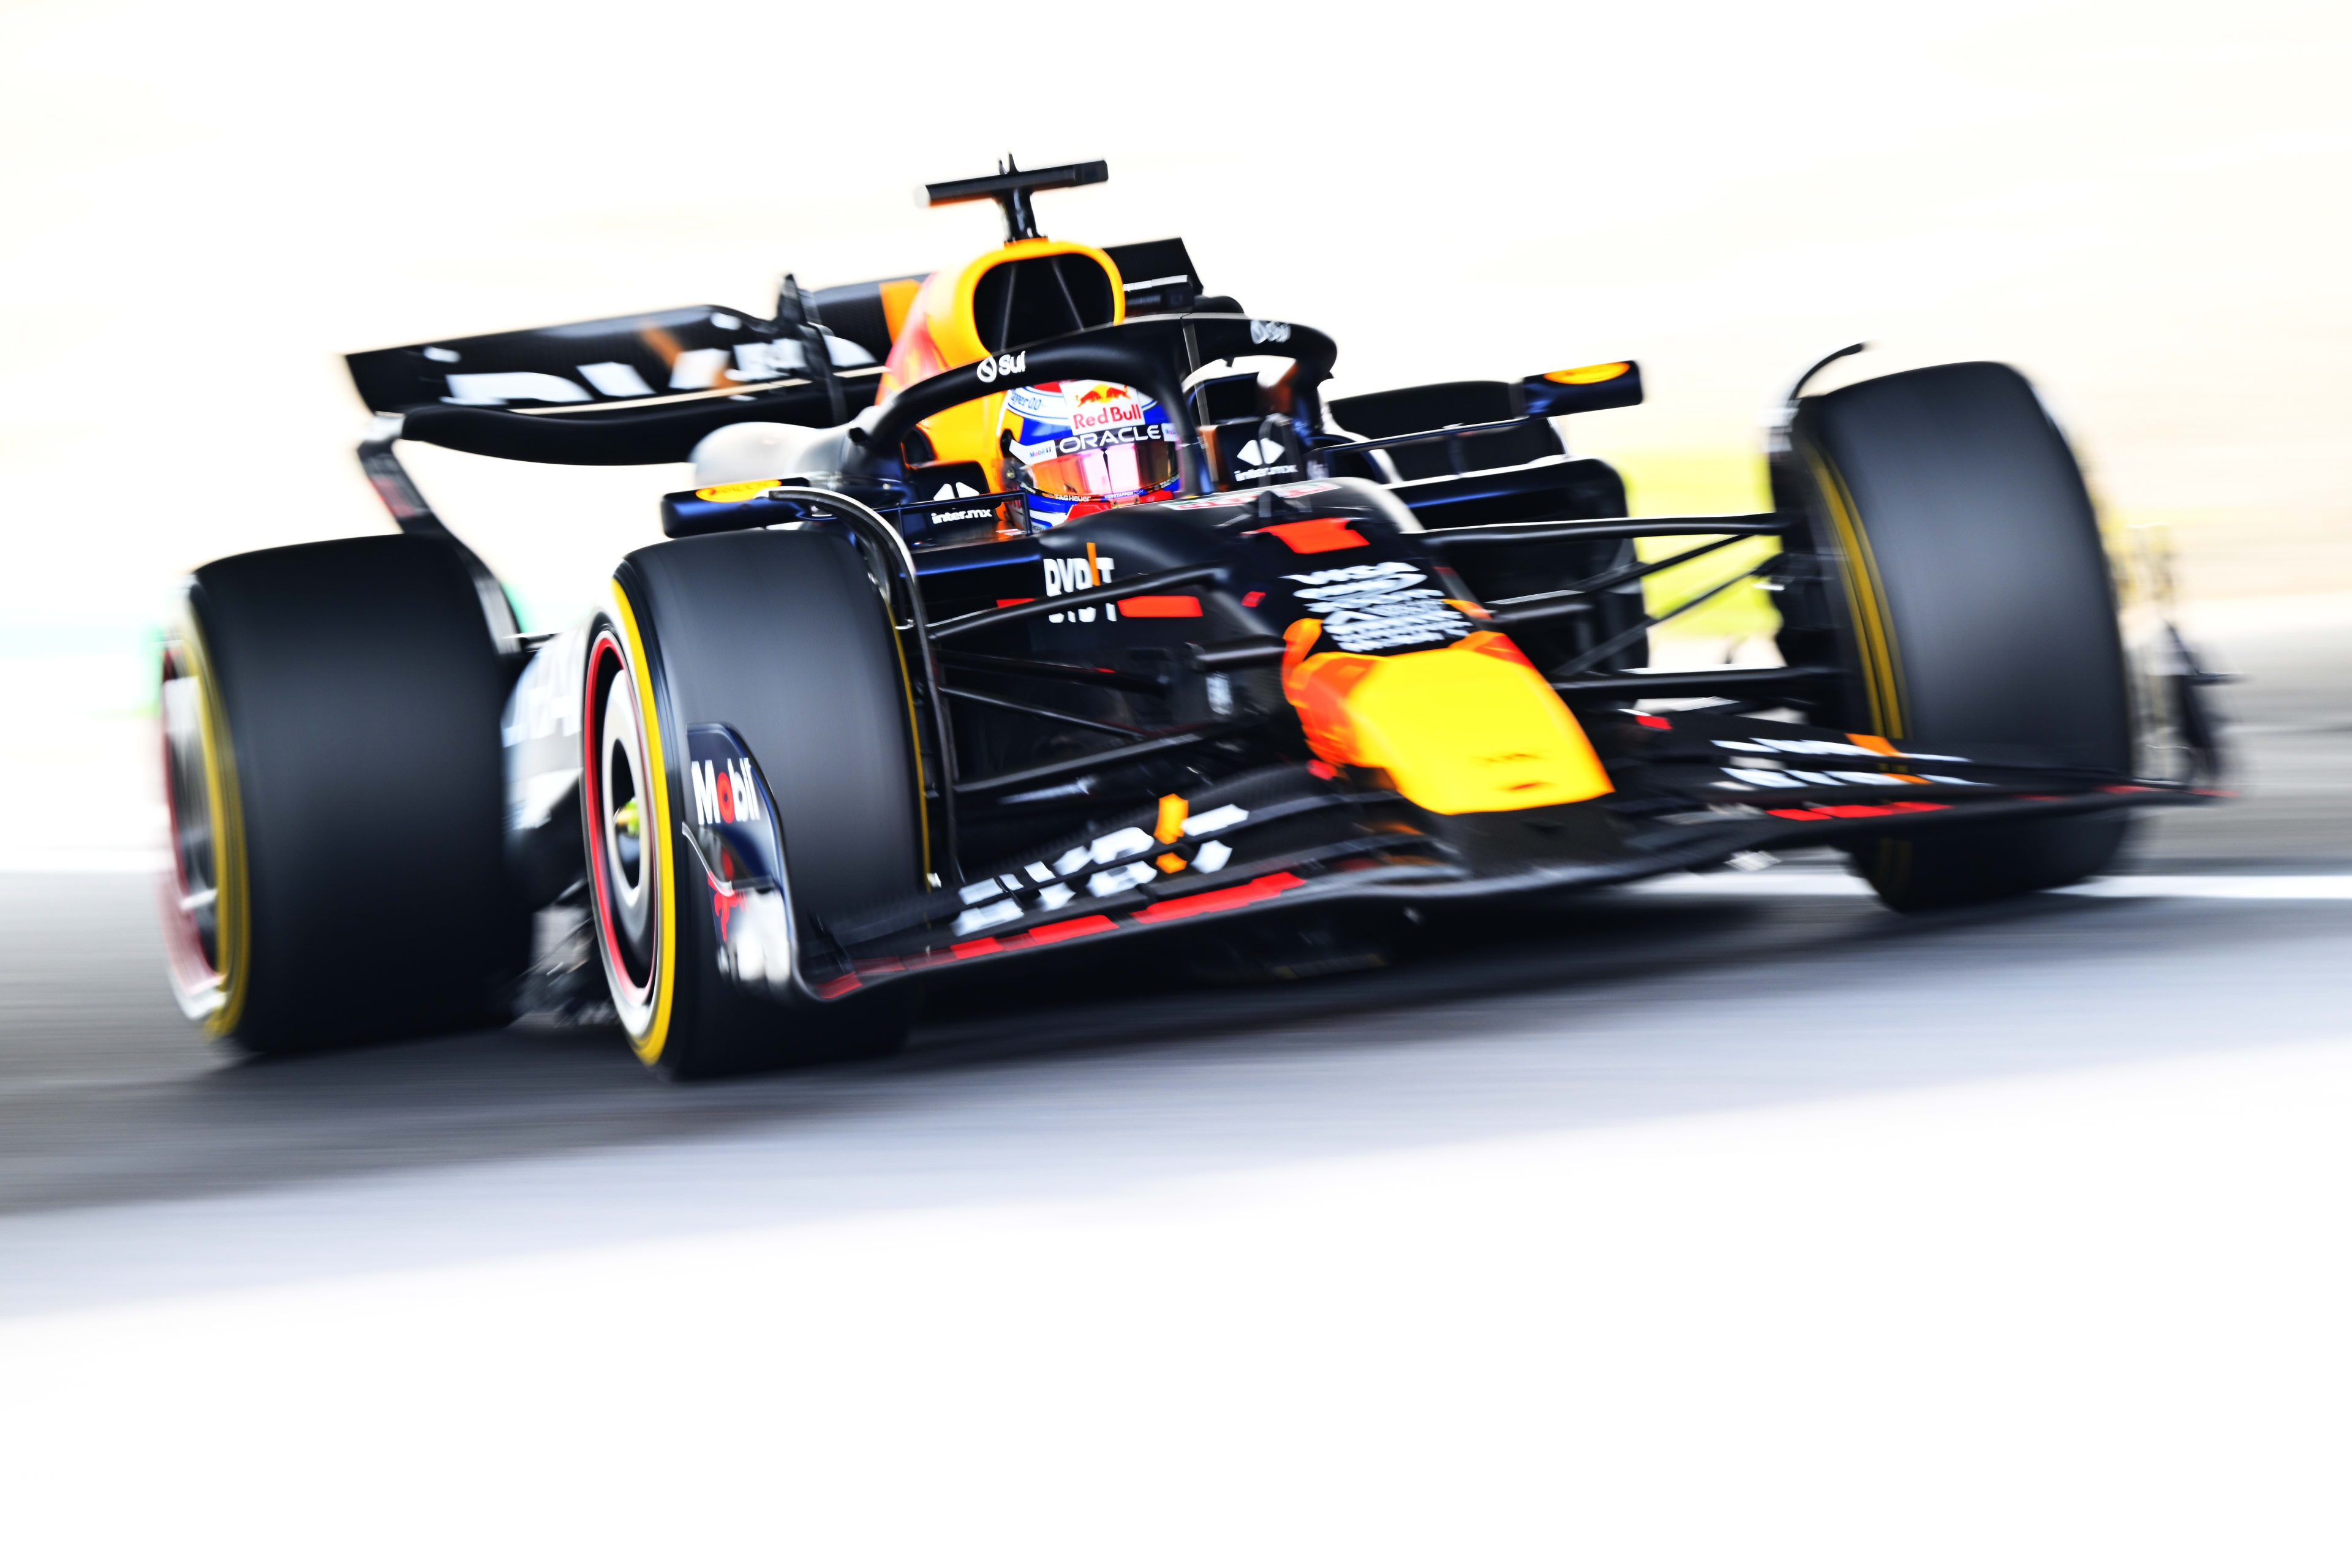 FP3: Verstappen leads Perez and Russell during final practice session in Japan